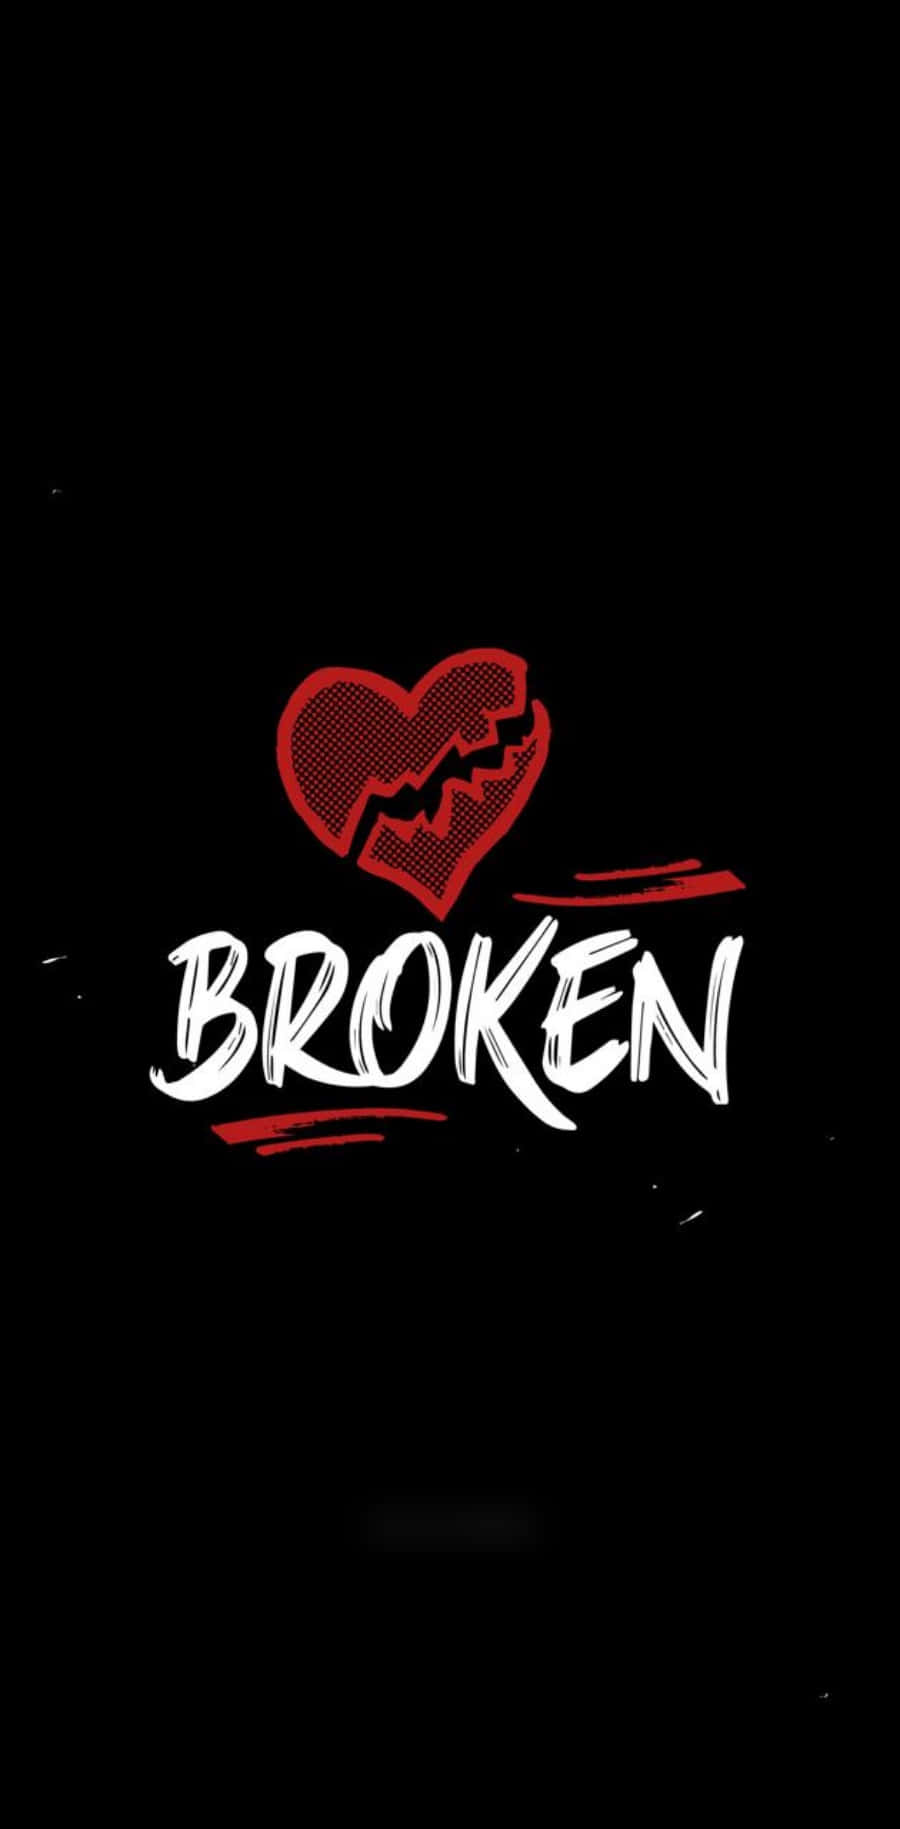 "A broken heart can feel like the end of the world, but in time it will get better."